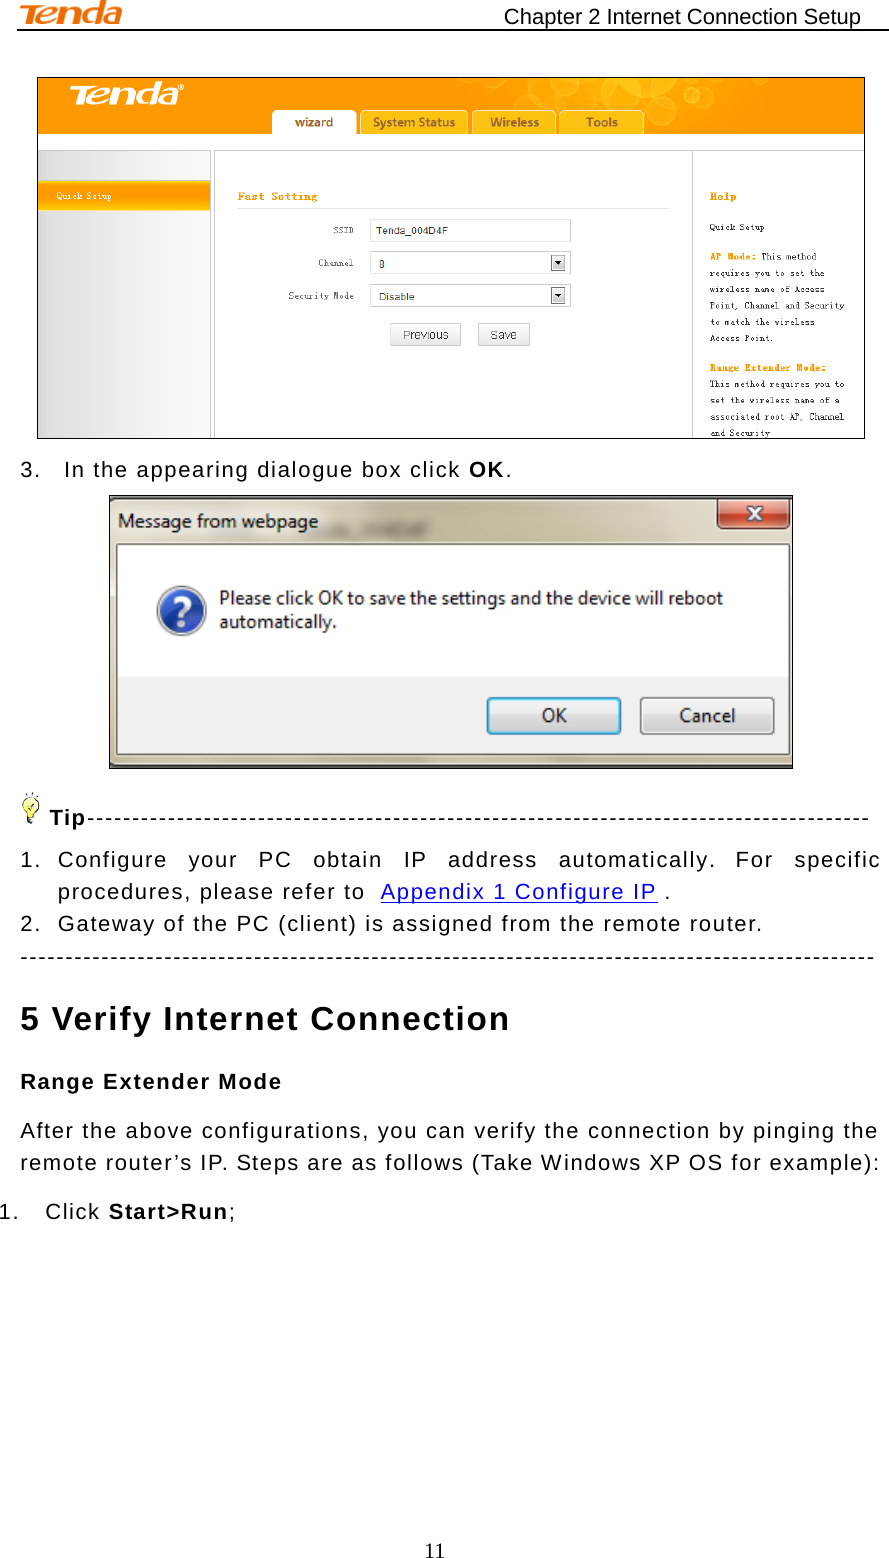                                    Chapter 2 Internet Connection Setup 11  3. In the appearing dialogue box click OK.  Tip--------------------------------------------------------------------------------------- 1. Configure your PC obtain IP address automatically. For specific procedures, please refer to  Appendix 1 Configure IP . 2. Gateway of the PC (client) is assigned from the remote router.   ----------------------------------------------------------------------------------------------- 5 Verify Internet Connection Range Extender Mode After the above configurations, you can verify the connection by pinging the remote router’s IP. Steps are as follows (Take Windows XP OS for example): 1. Click Start&gt;Run; 